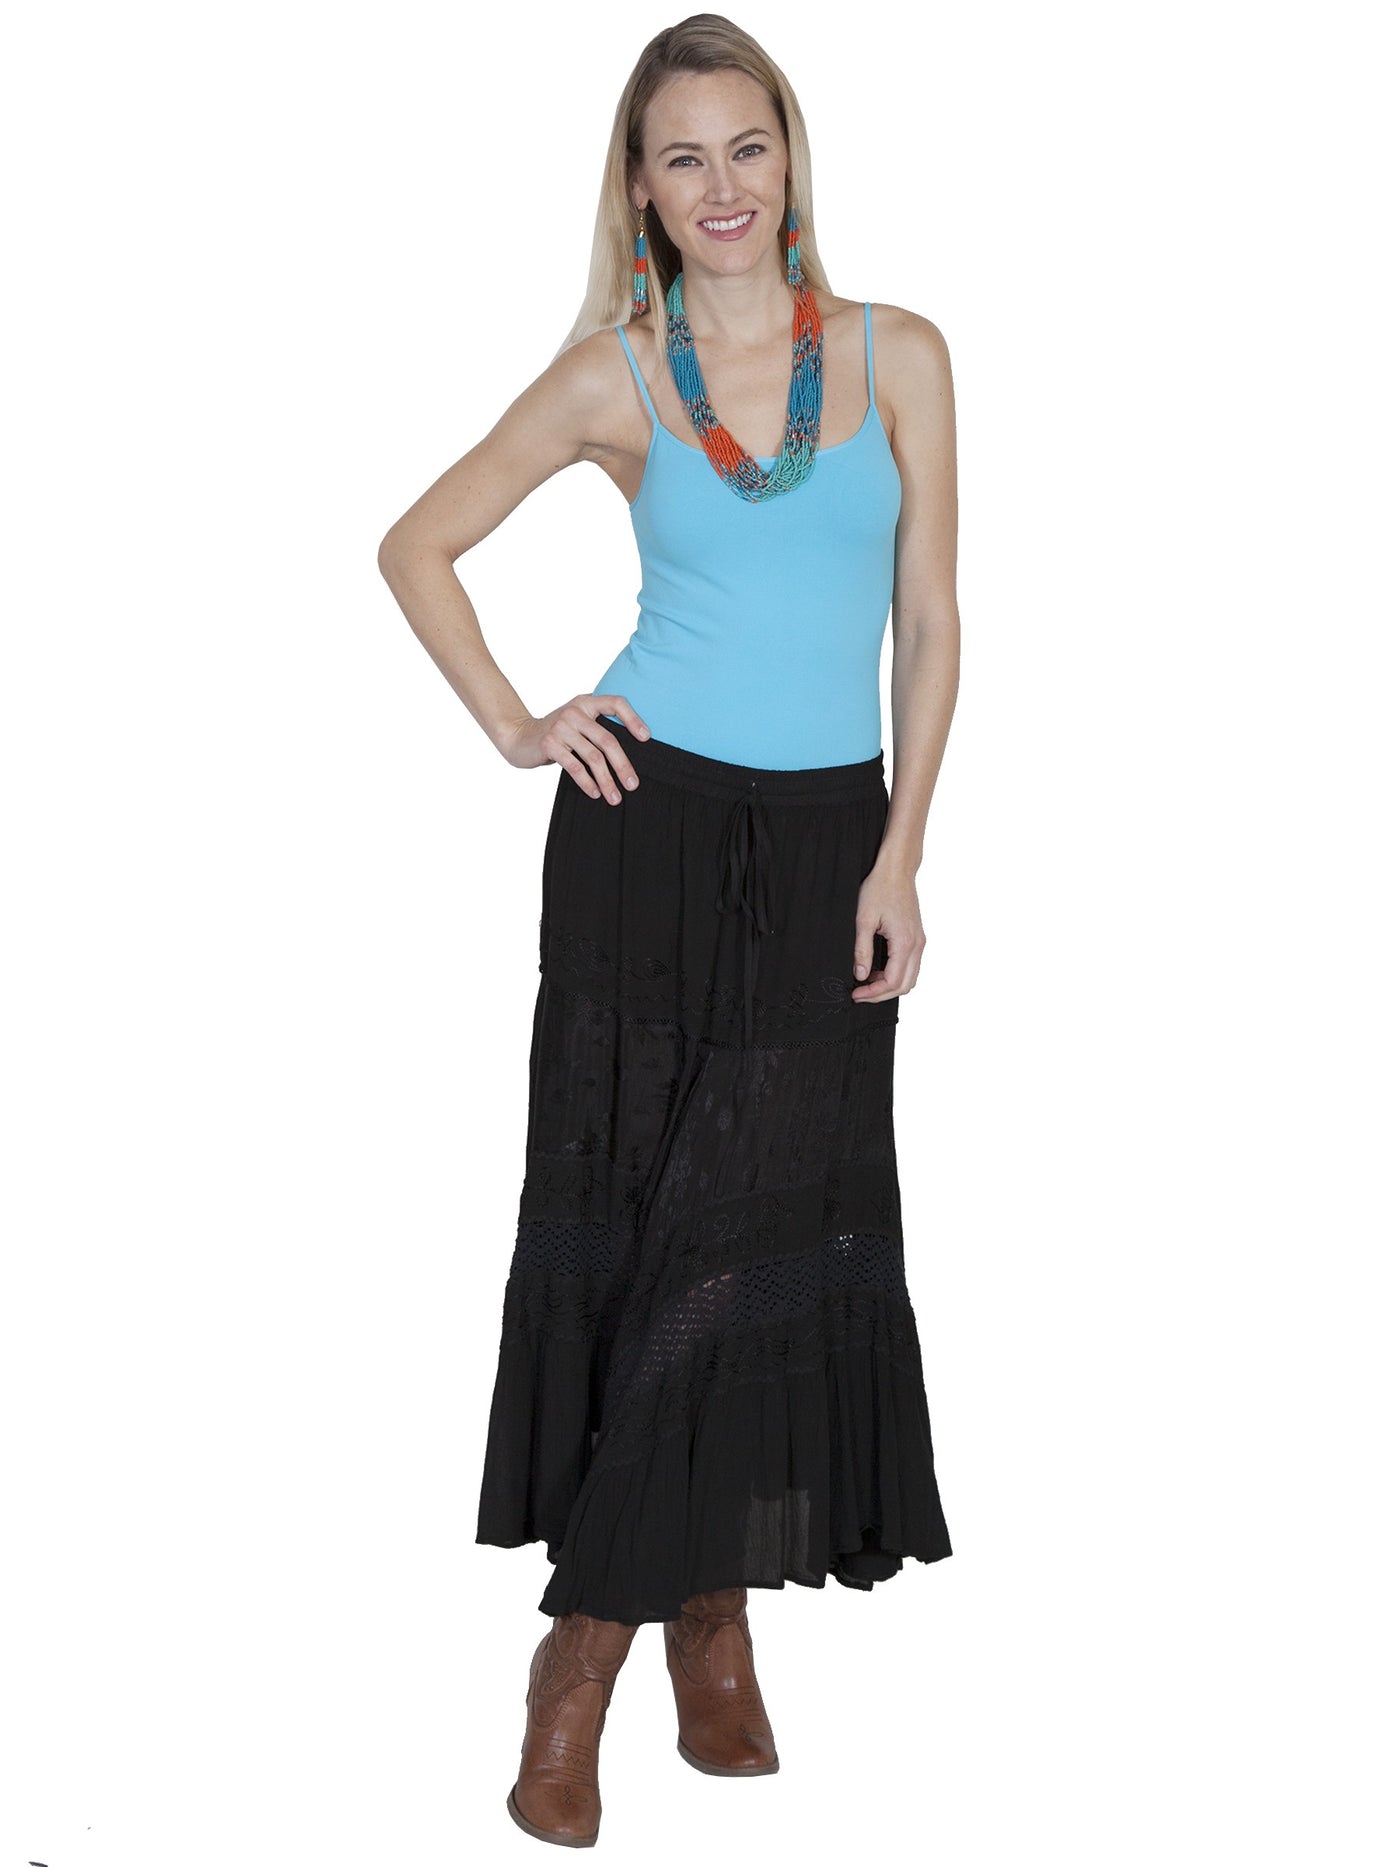 Western Style Full Length Embroidered Skirt in Black - SOLD OUT